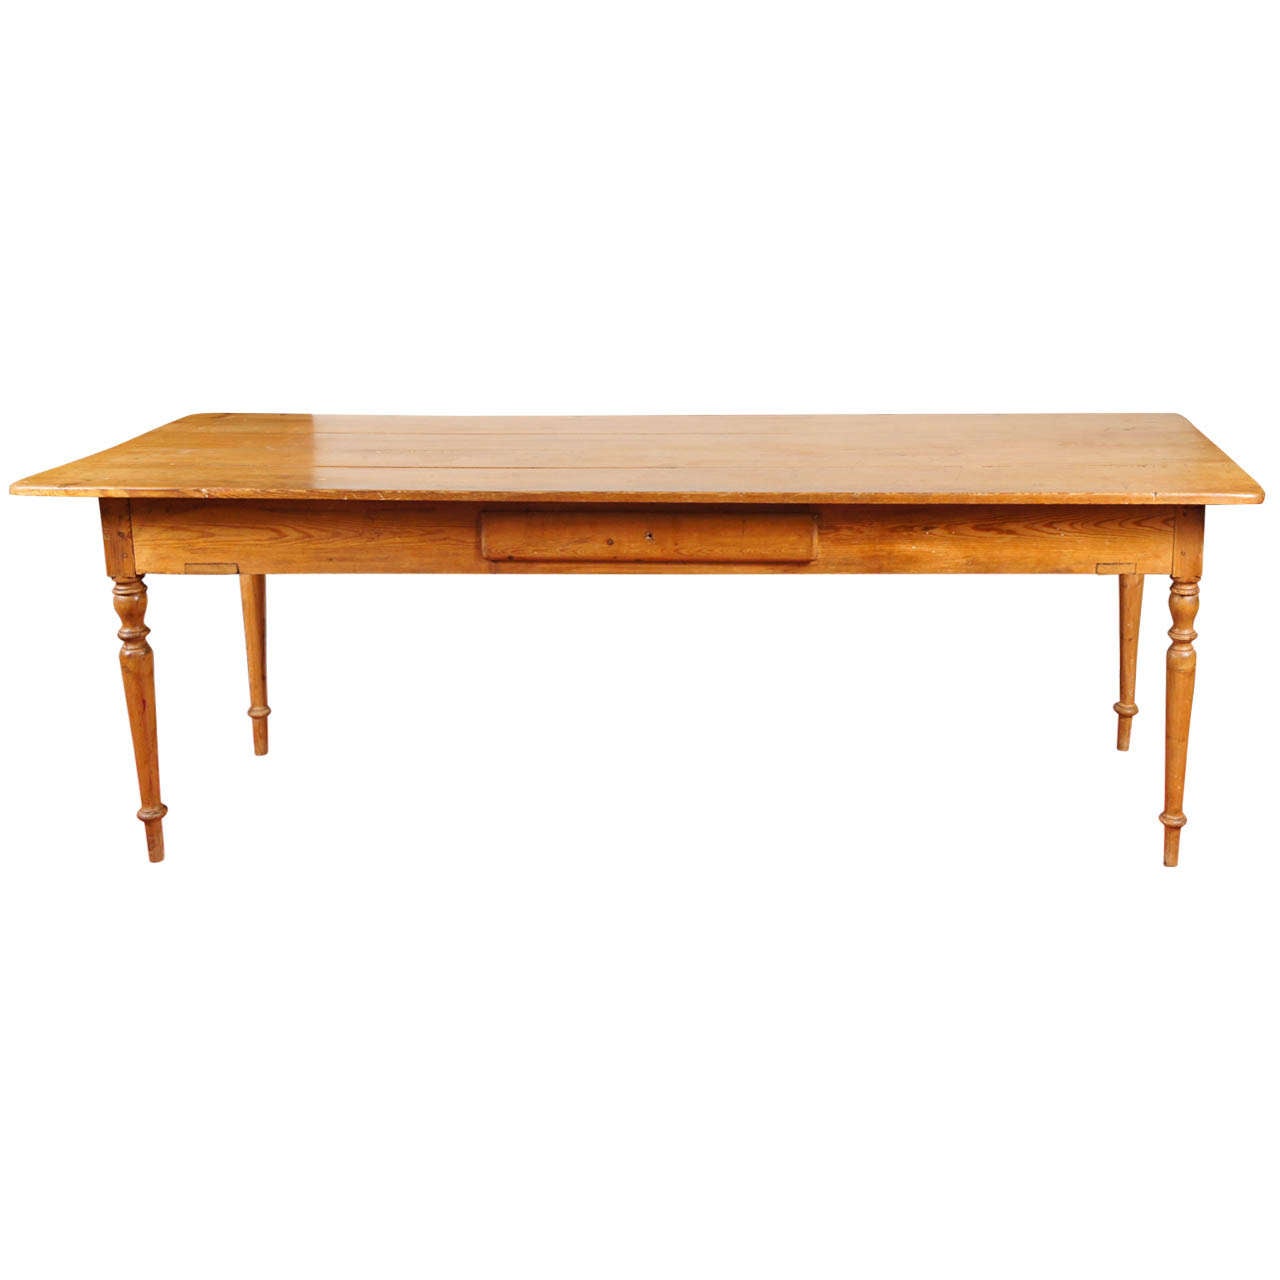 19th Century English Pine Country Dining Table